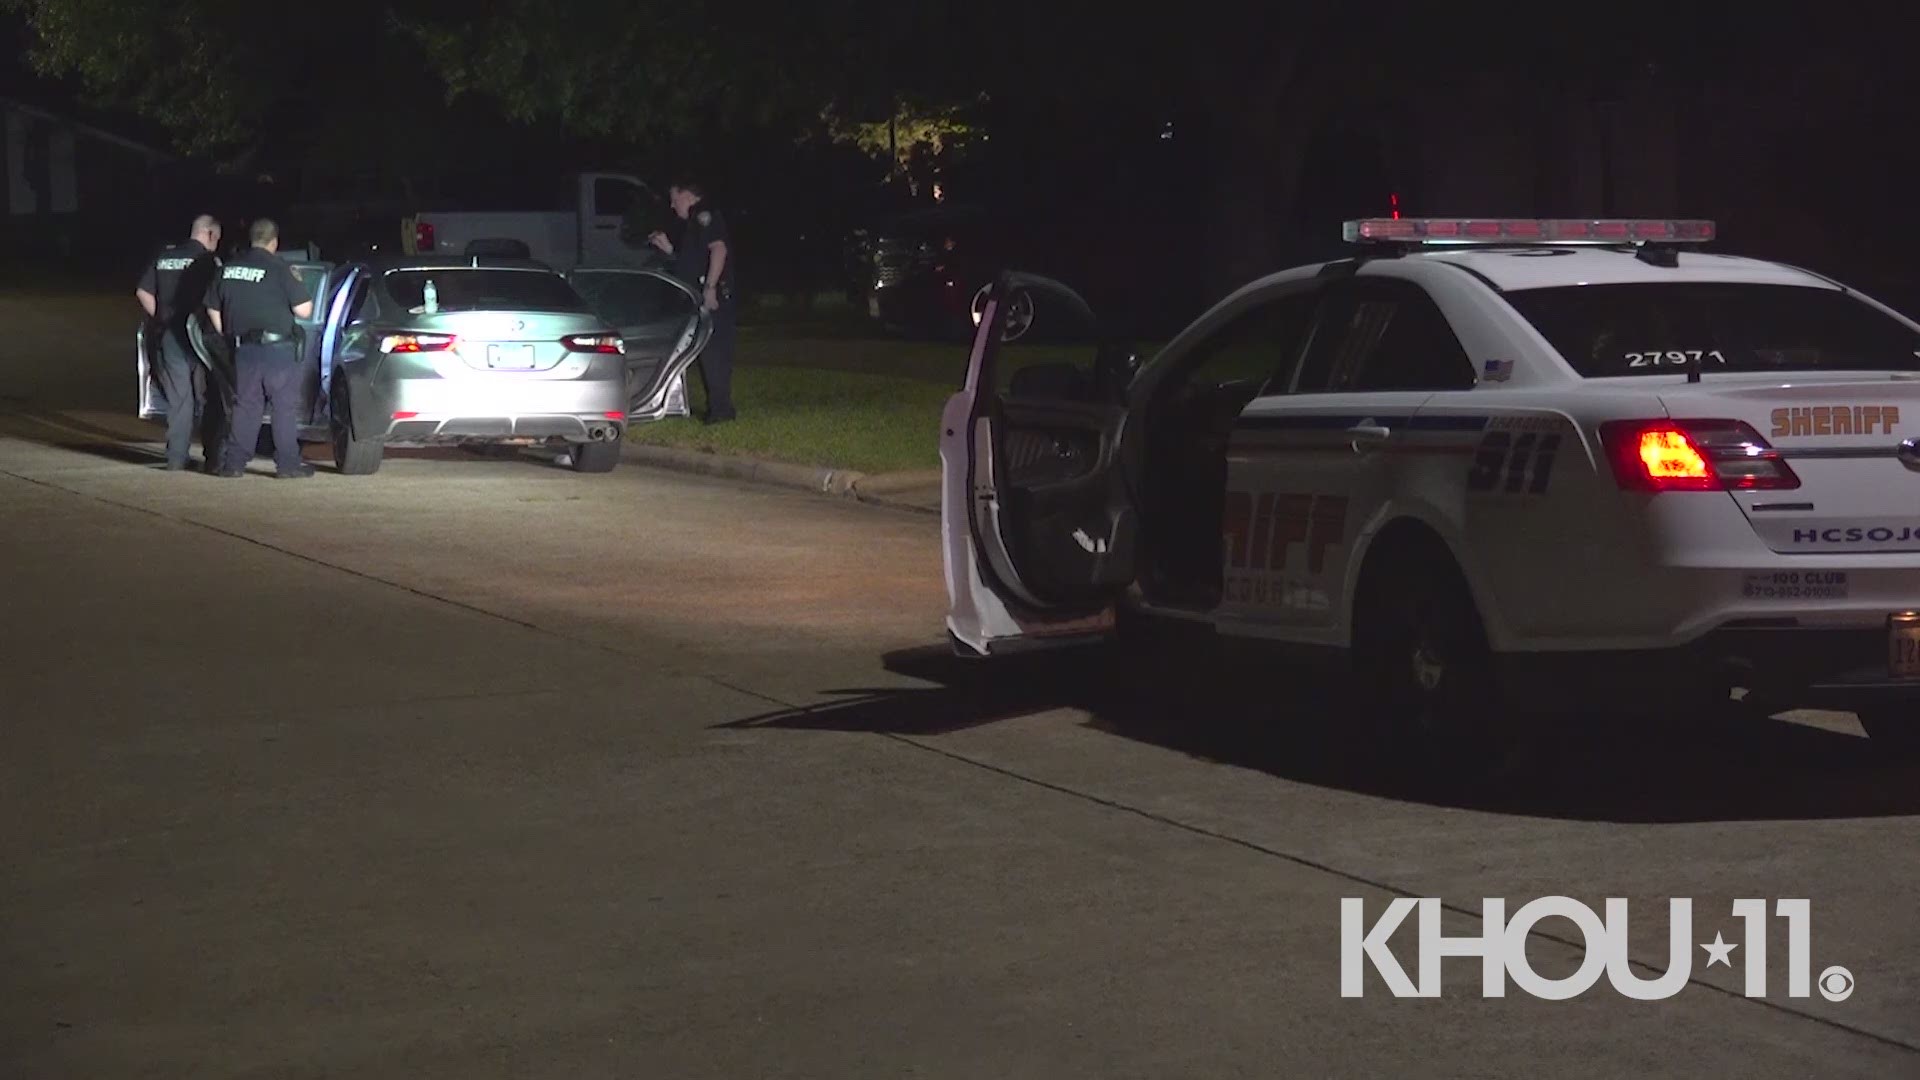 A resident shot a person during an apparent road rage incident outside a home in northwest Harris County, deputies said Sunday. Lt. Randy Rush said deputies responded to Royal Mile at Tain at about 1:30 a.m.